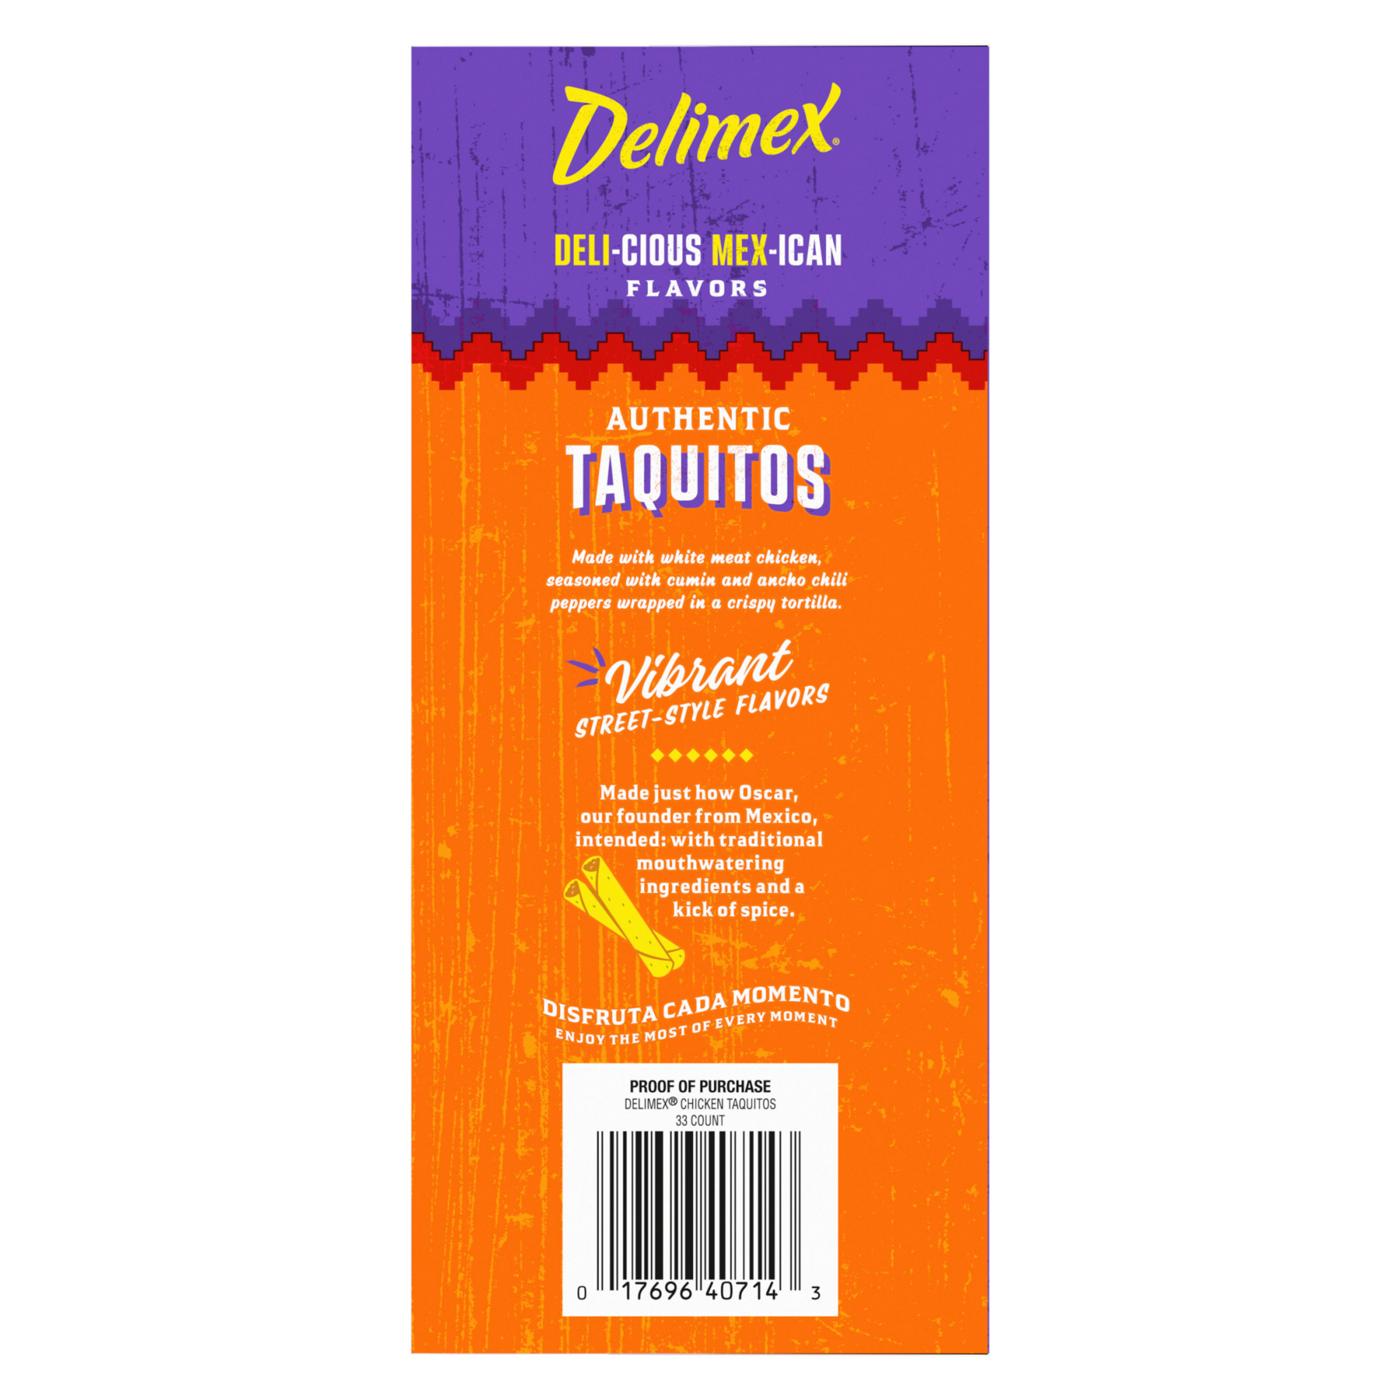 Delimex White Meat Chicken Corn Taquitos; image 9 of 9